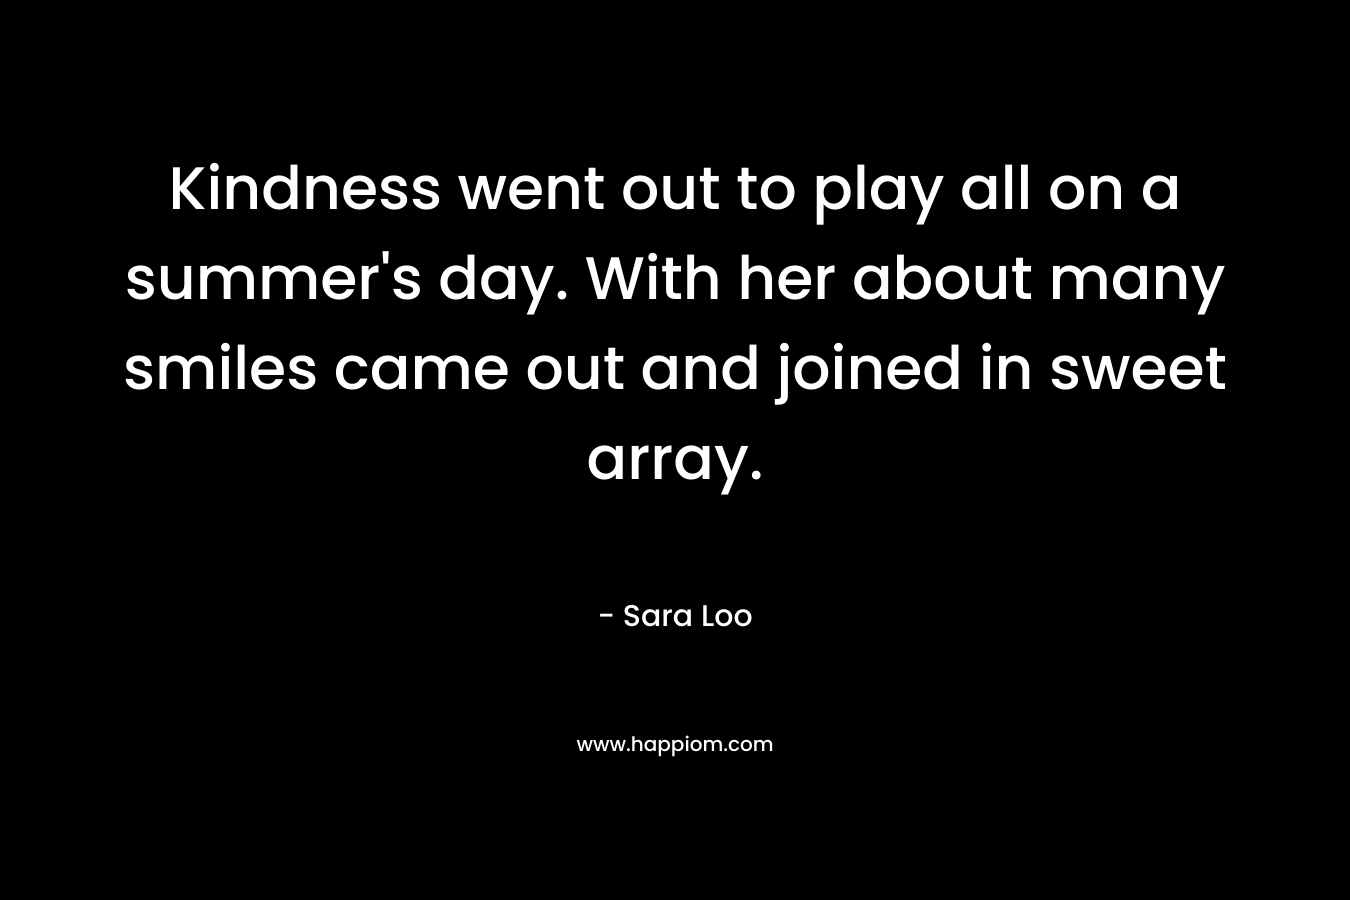 Kindness went out to play all on a summer’s day. With her about many smiles came out and joined in sweet array. – Sara Loo